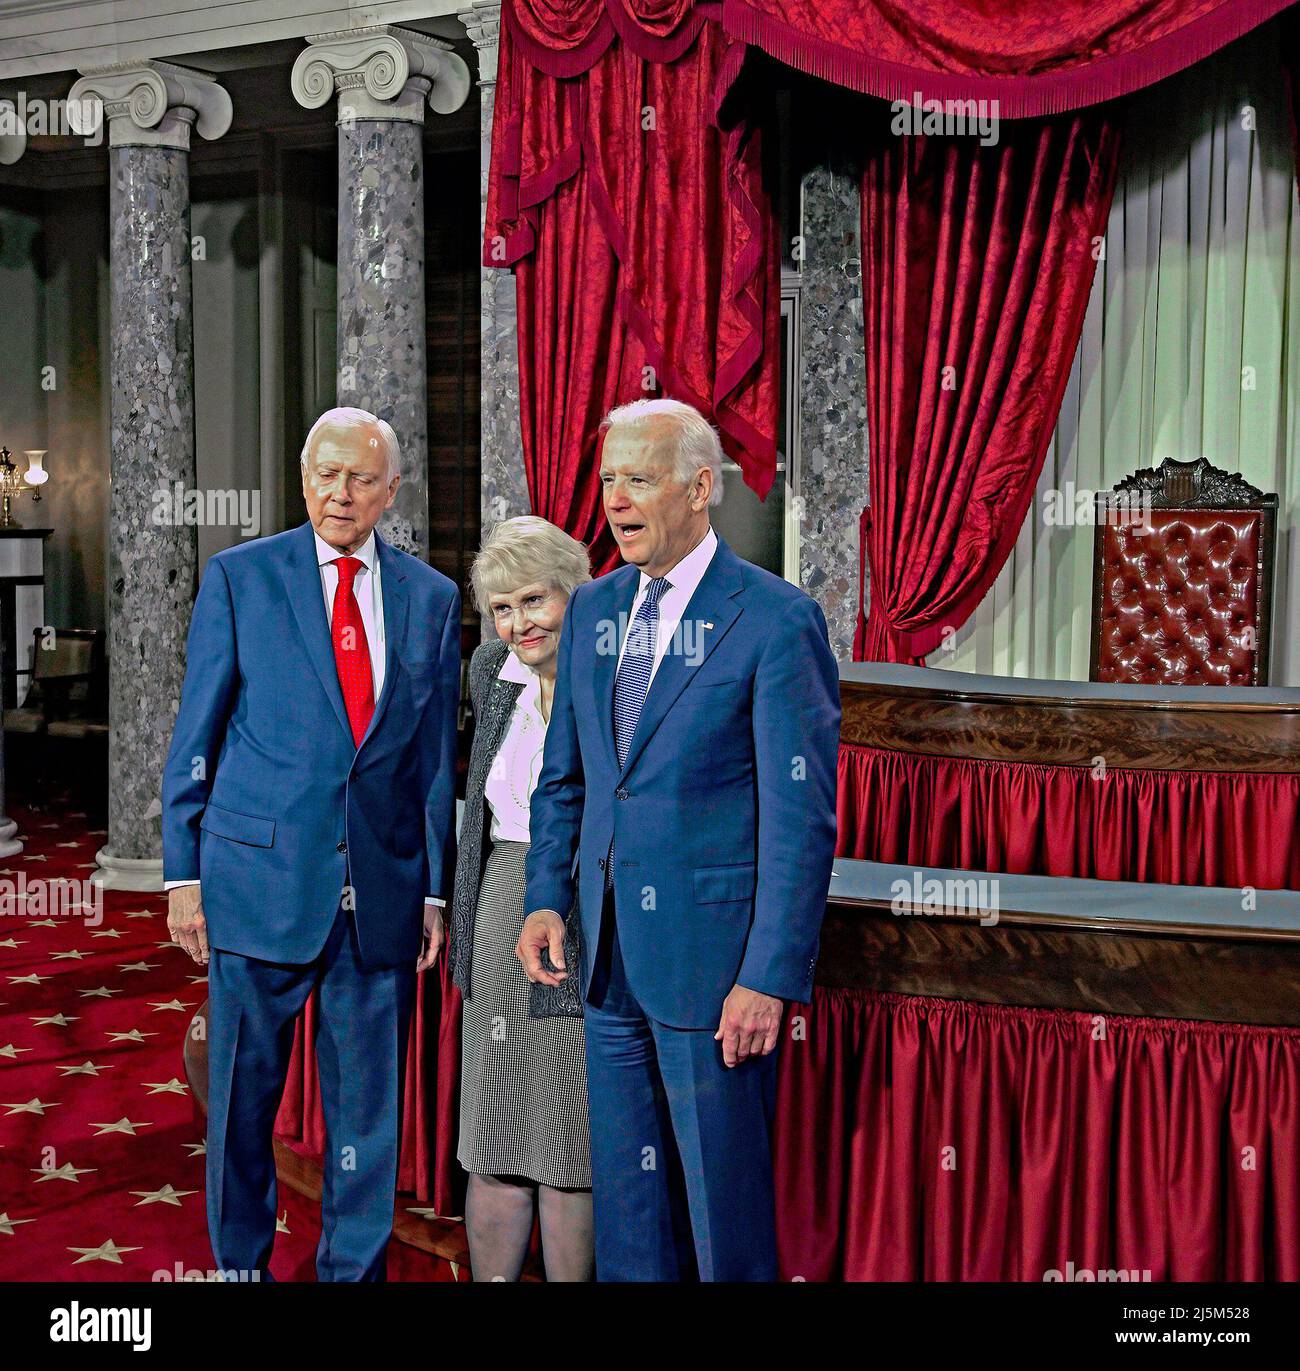 WASHINGTON, DC JANUARY 6, 2015  Senator Orrin Hatch (R-UT) with his wife Elaine Hatch pose for pictures with Vice President Joe Biden (D) after Biden delivered the oath of office to Hatch Stock Photo